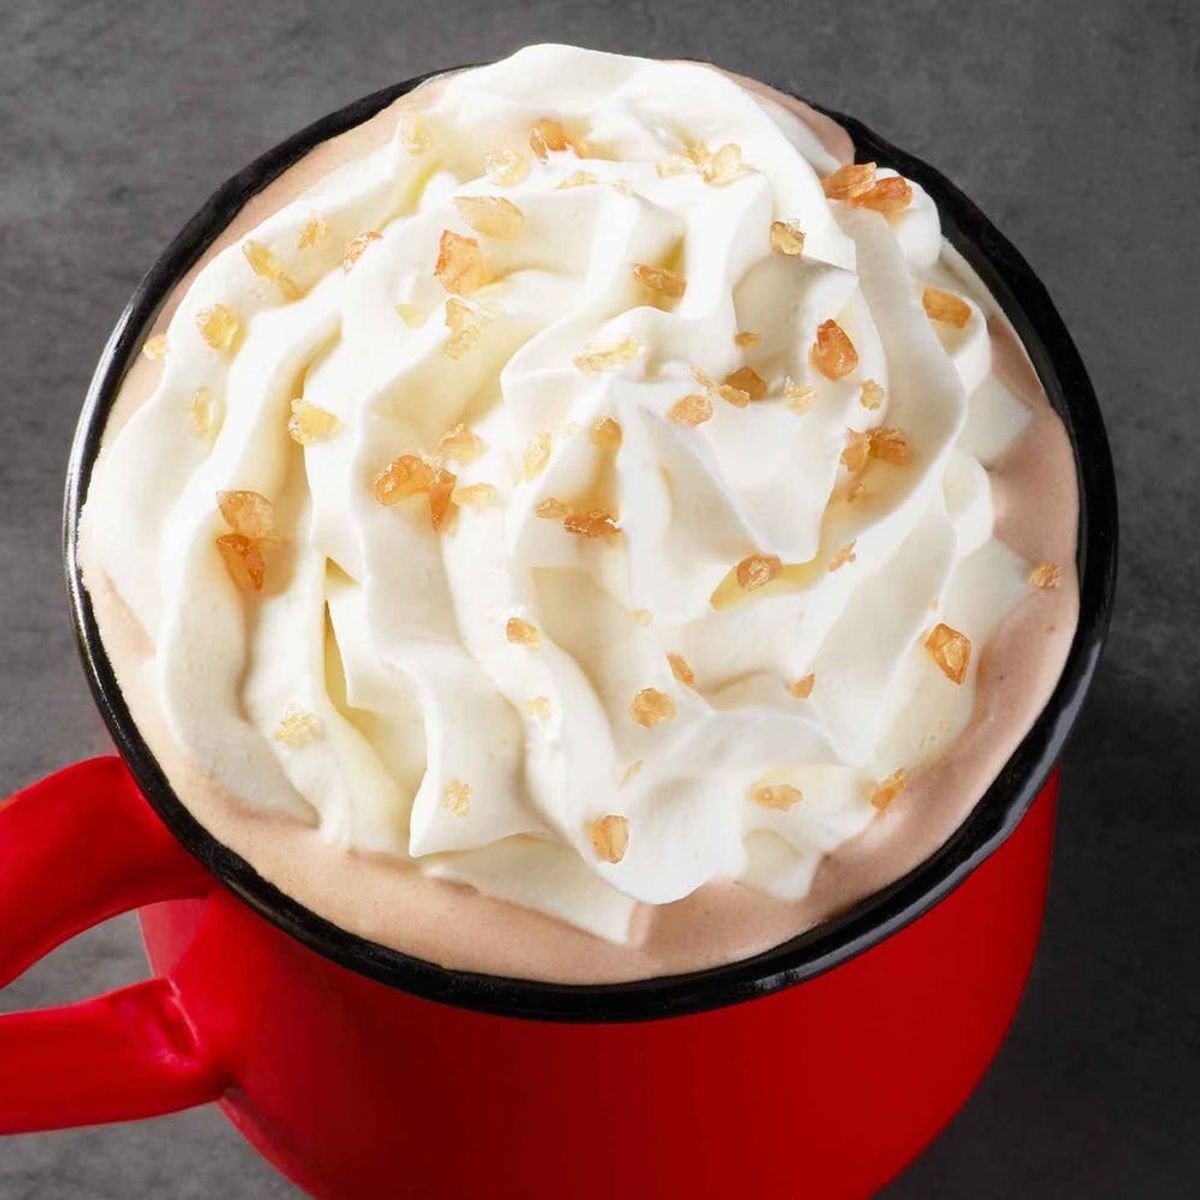 Starbucks’ New Hot Chocolate Is Dairy-Free and Totally Decadent